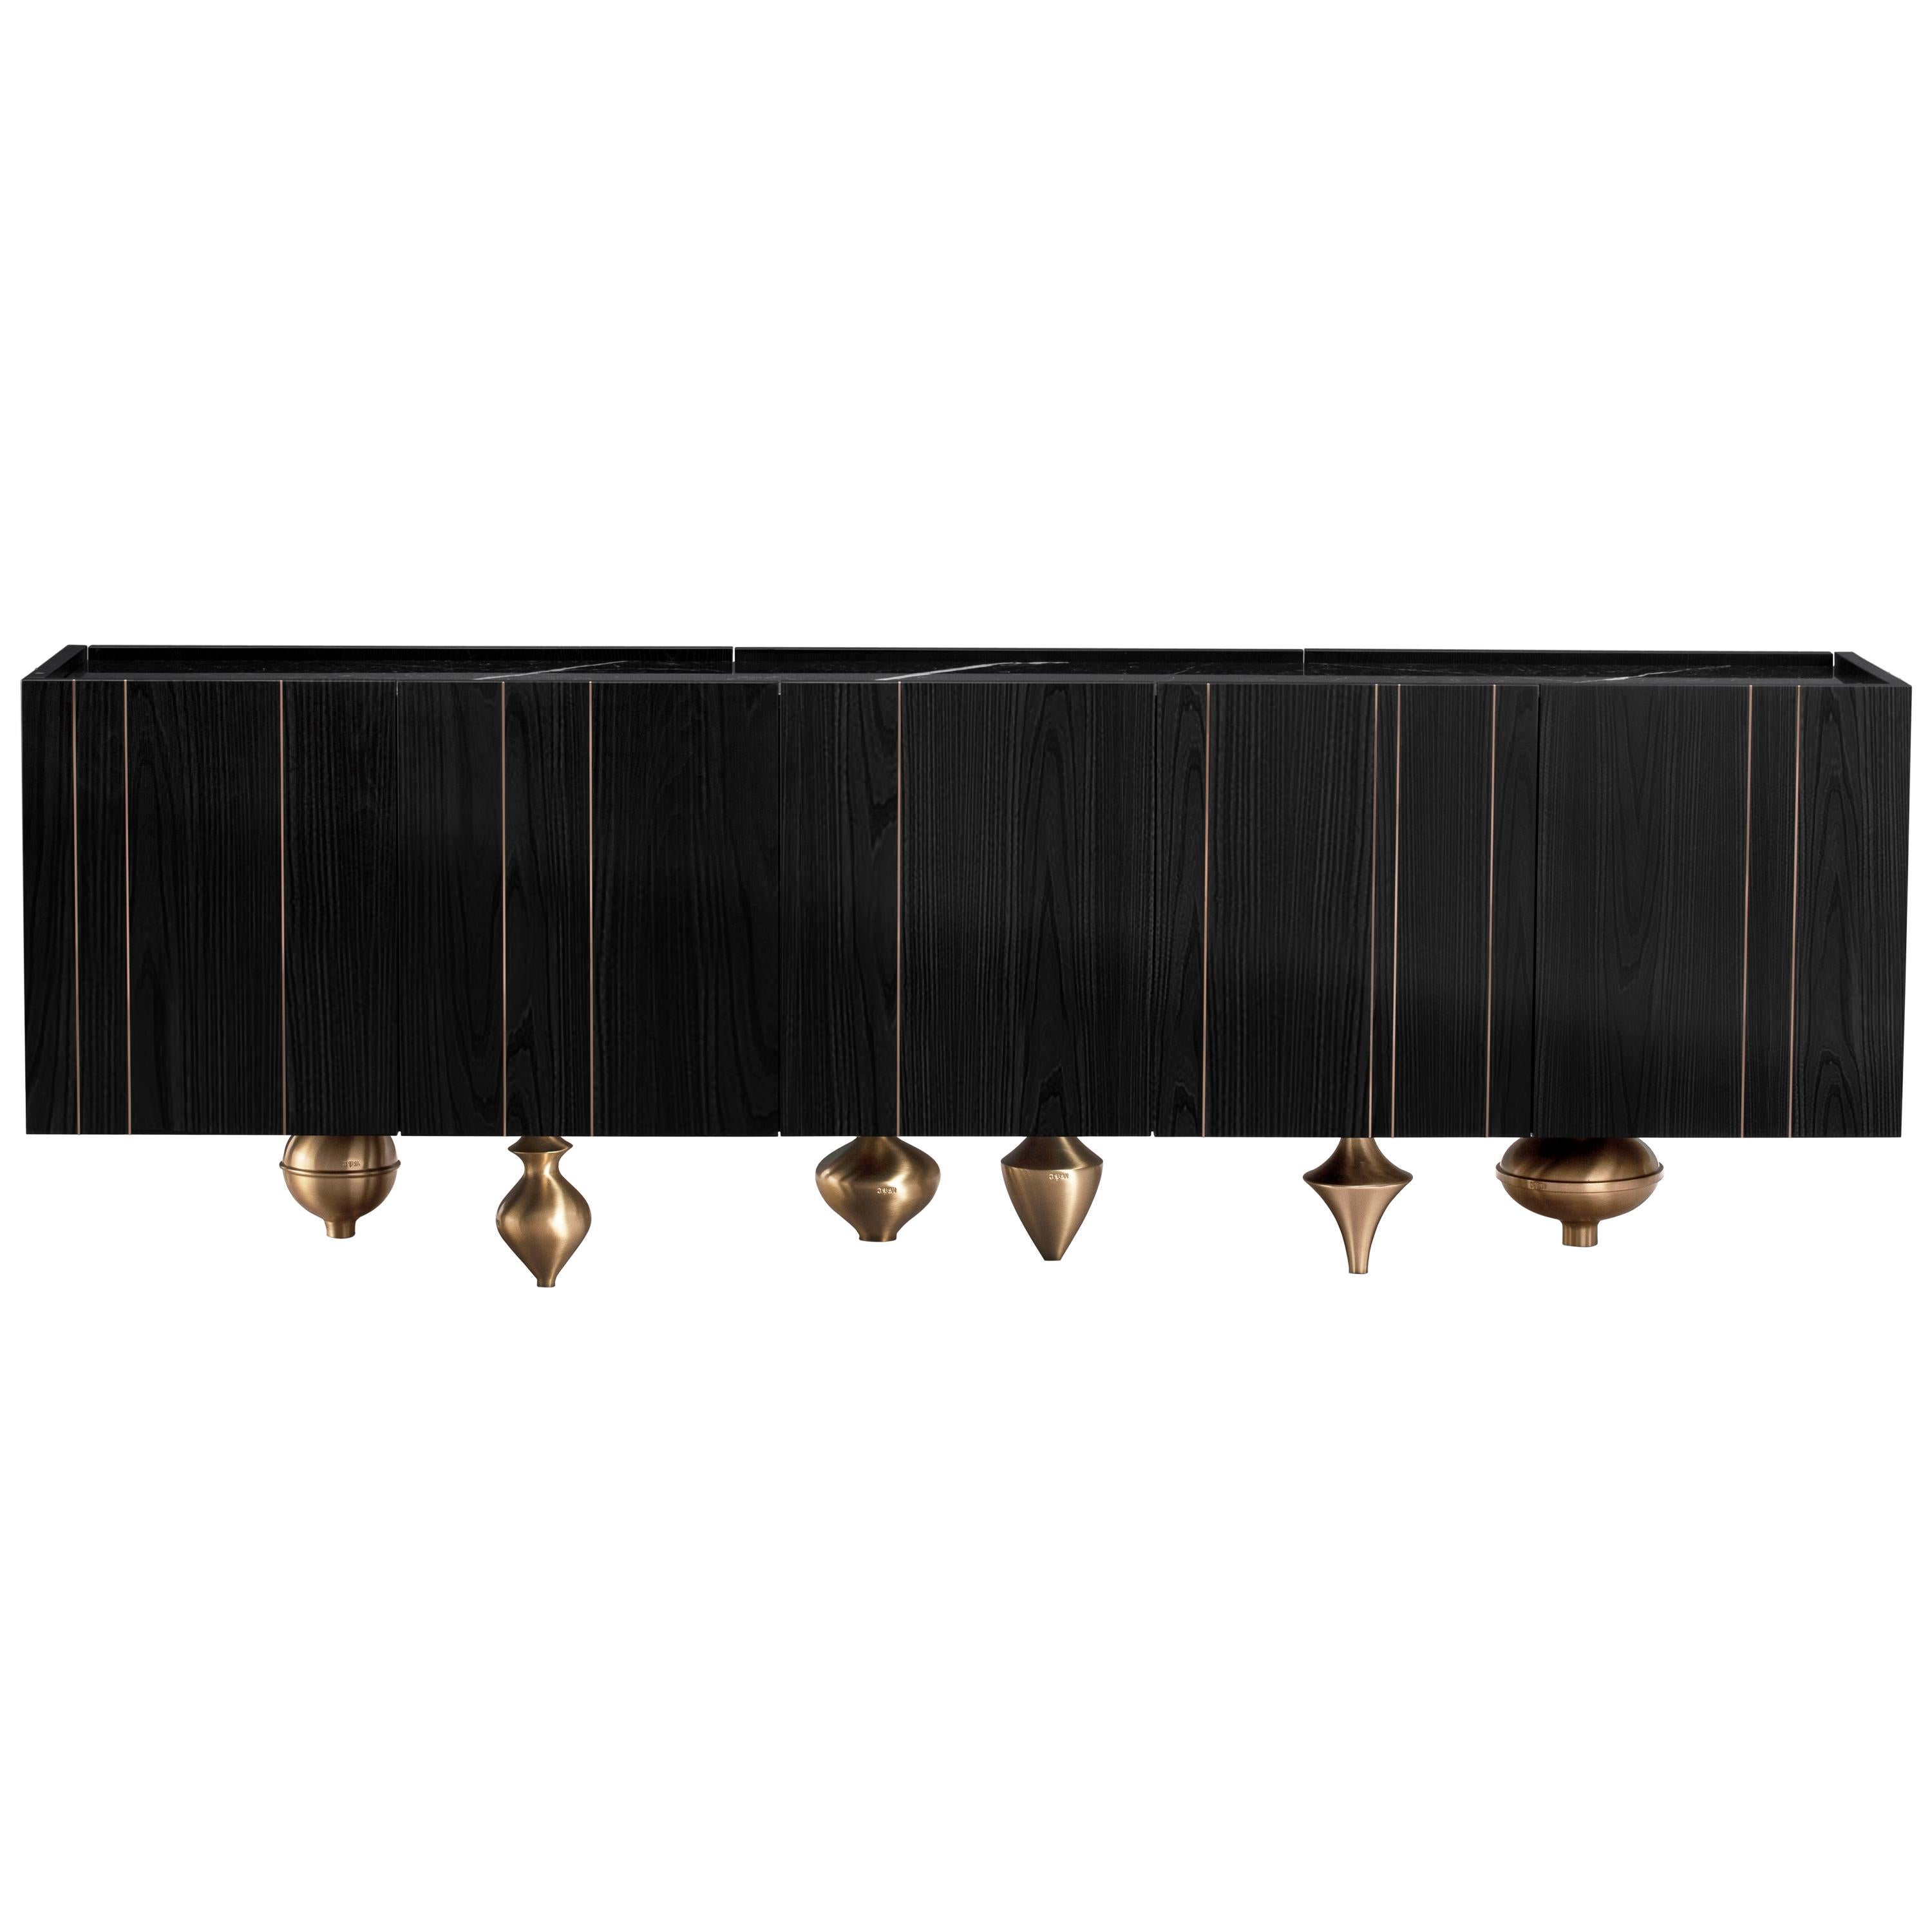 II Pezzo "Credenza" 1 Sideboard in Black Stained Ash, Brass and Marquinia Marble For Sale